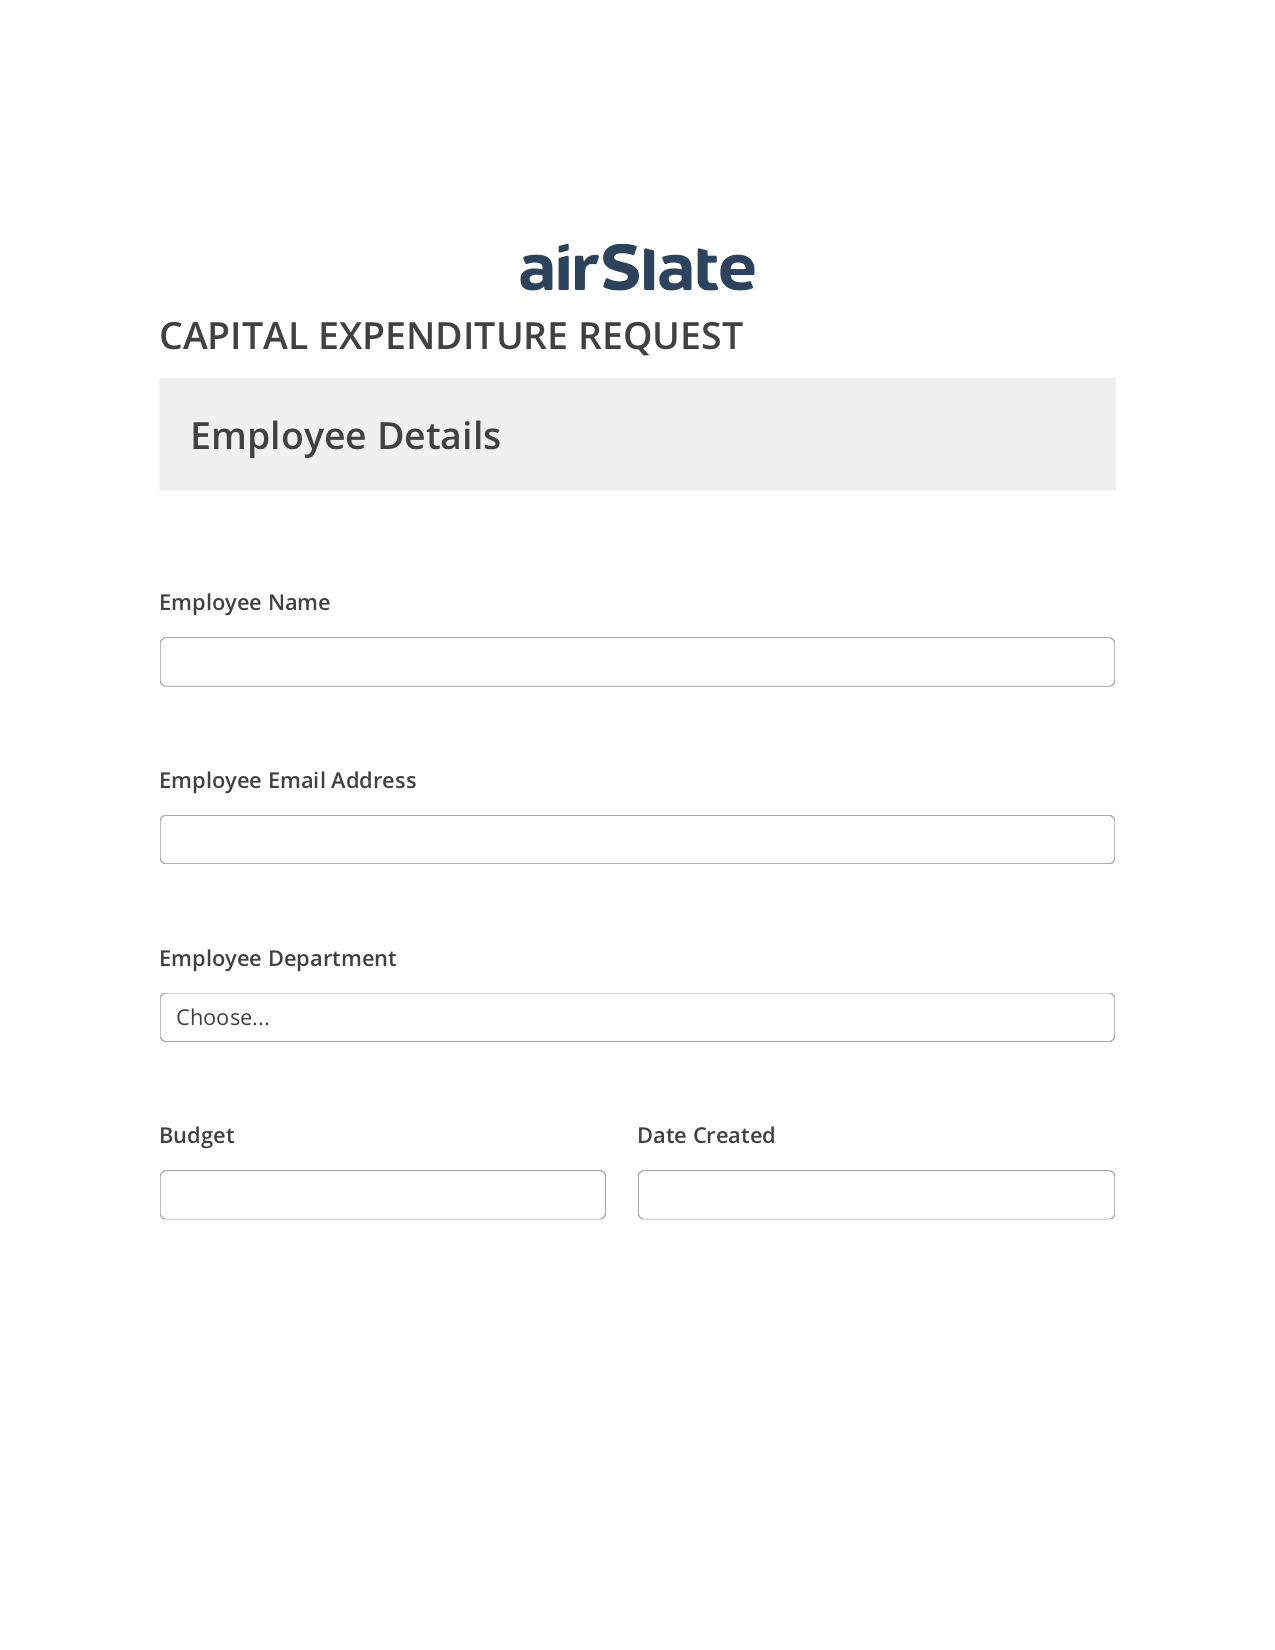 Capital Expenditure Request Approval Workflow Prefill from NetSuite records, Email Notification Bot, Email Notification Postfinish